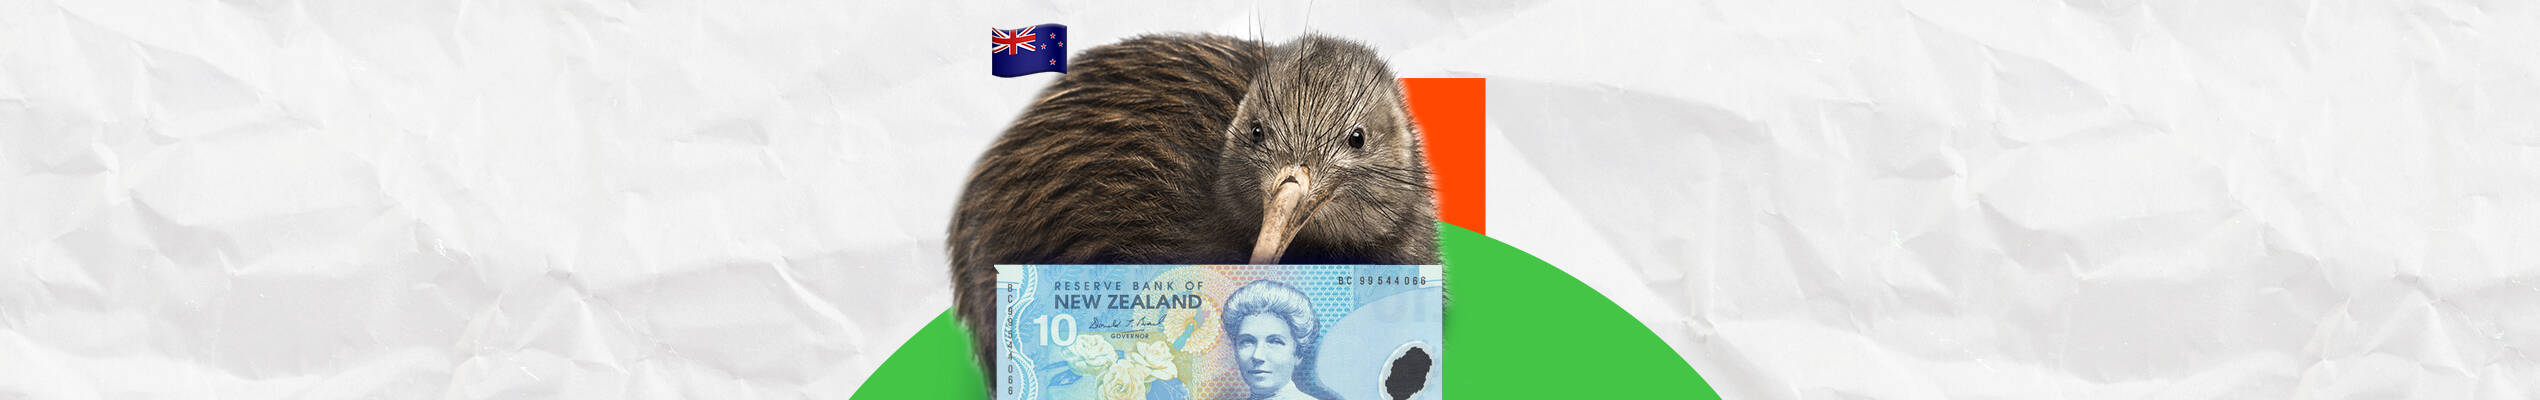 NZD/USD: dropping to September lows?